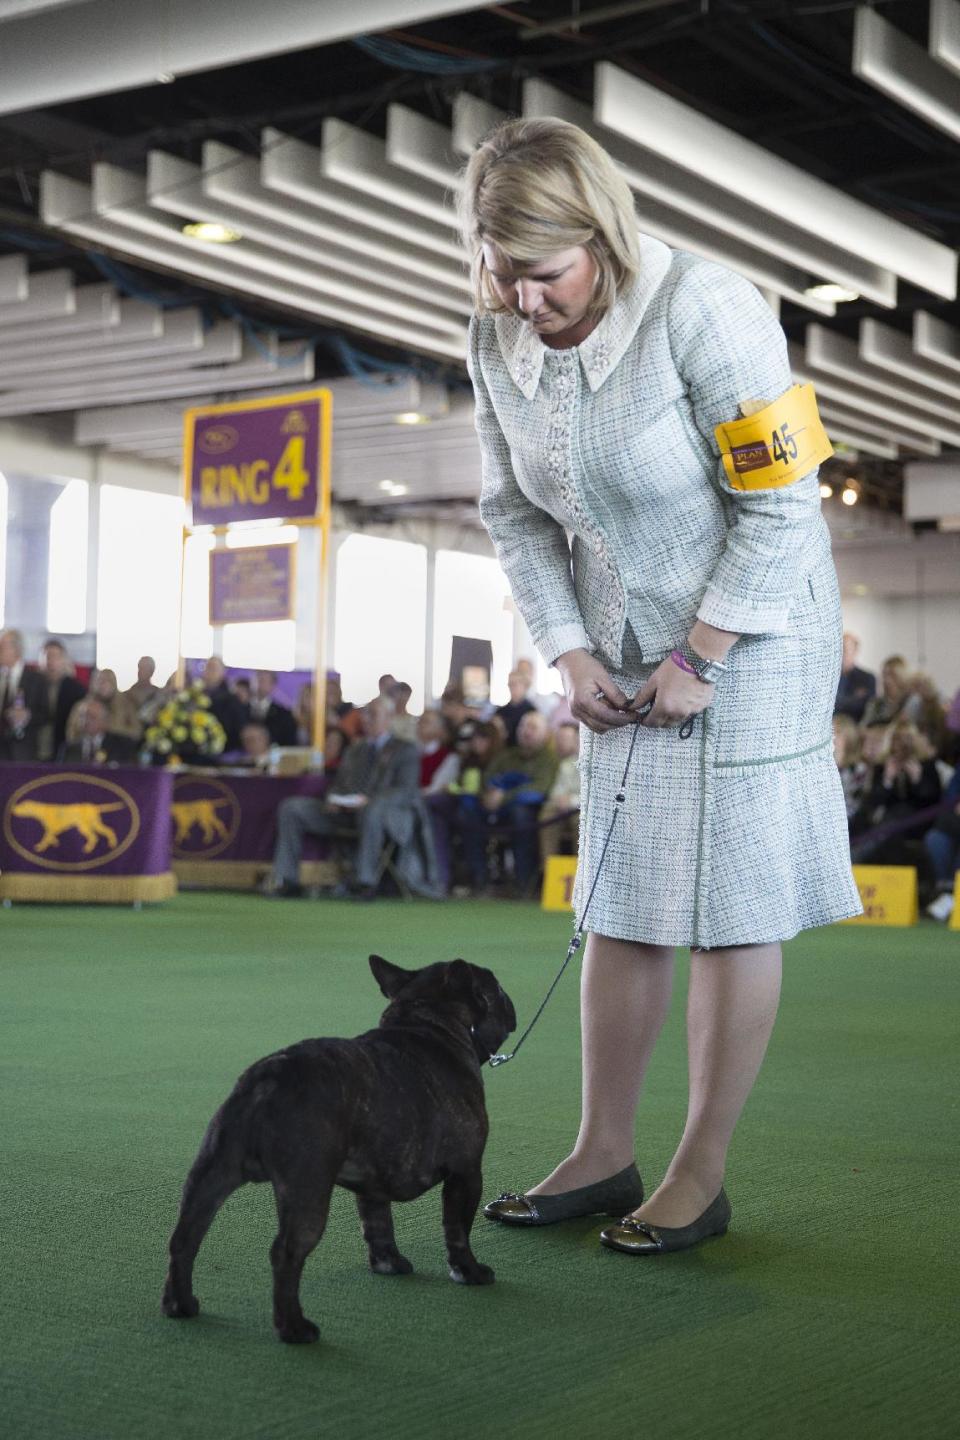 Amy Rutherford and Leo, a French bulldog, wait for instructions in the show ring during a breed competition at the Westminster Kennel Club dog show, Monday, Feb. 10, 2014, in New York. While New York Fashion Week stakes out clothing’s cutting edge, a more toned-down style is getting its own showcase two miles away at the nation’s most prestigious dog event. (AP Photo/John Minchillo)